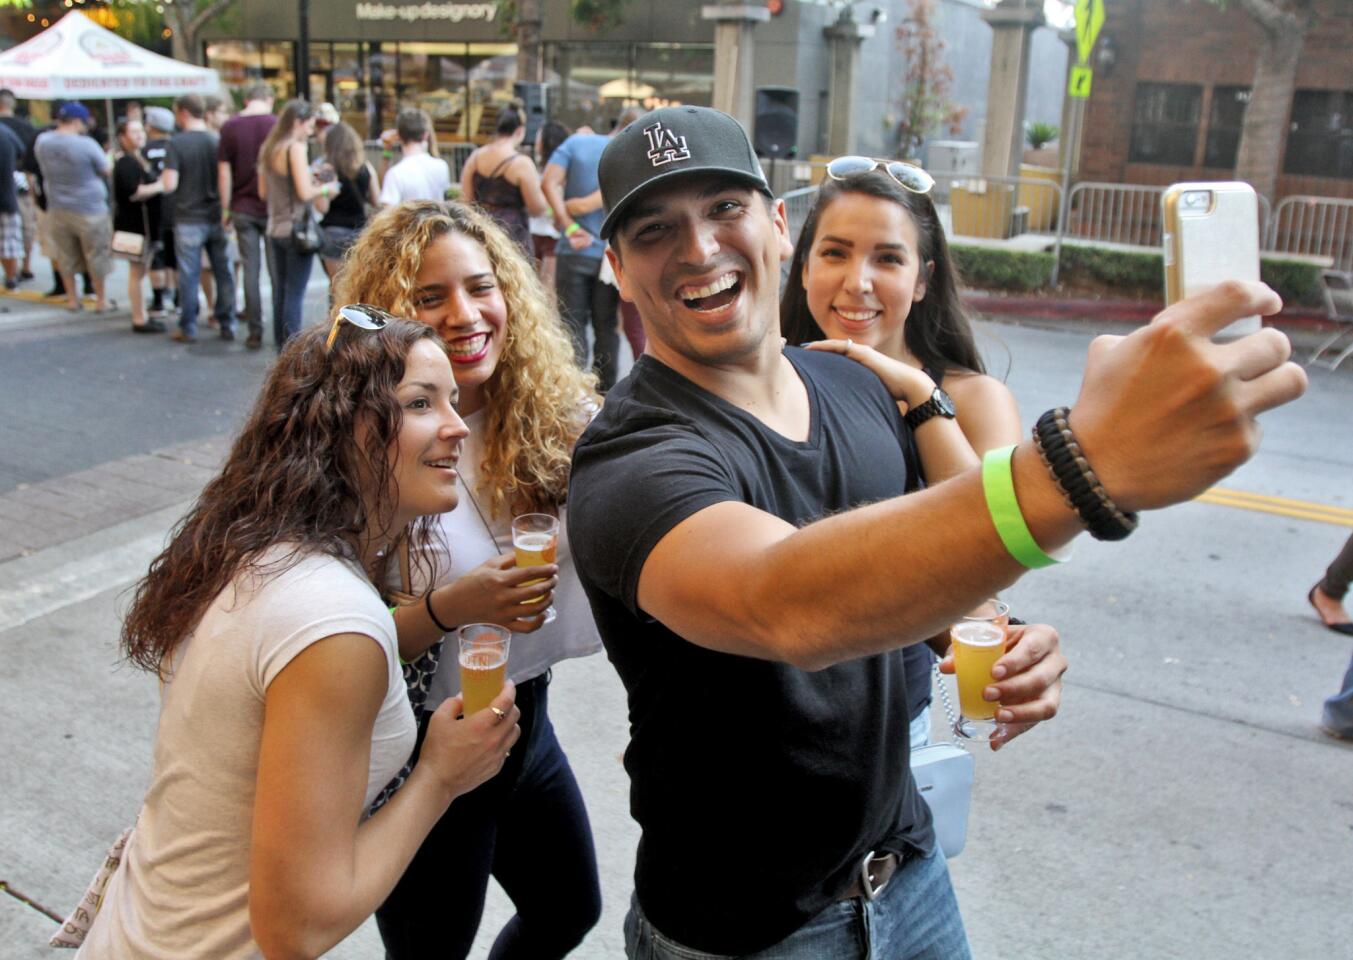 Johnathan Torrez of Santa Clarita, center, takes a selfie with friends and wife, from left, Alysa Valles, Amanda May and Raquel Torrez at the Burbank Beer Festival in downtown Burbank on Saturday, October 17, 2015.